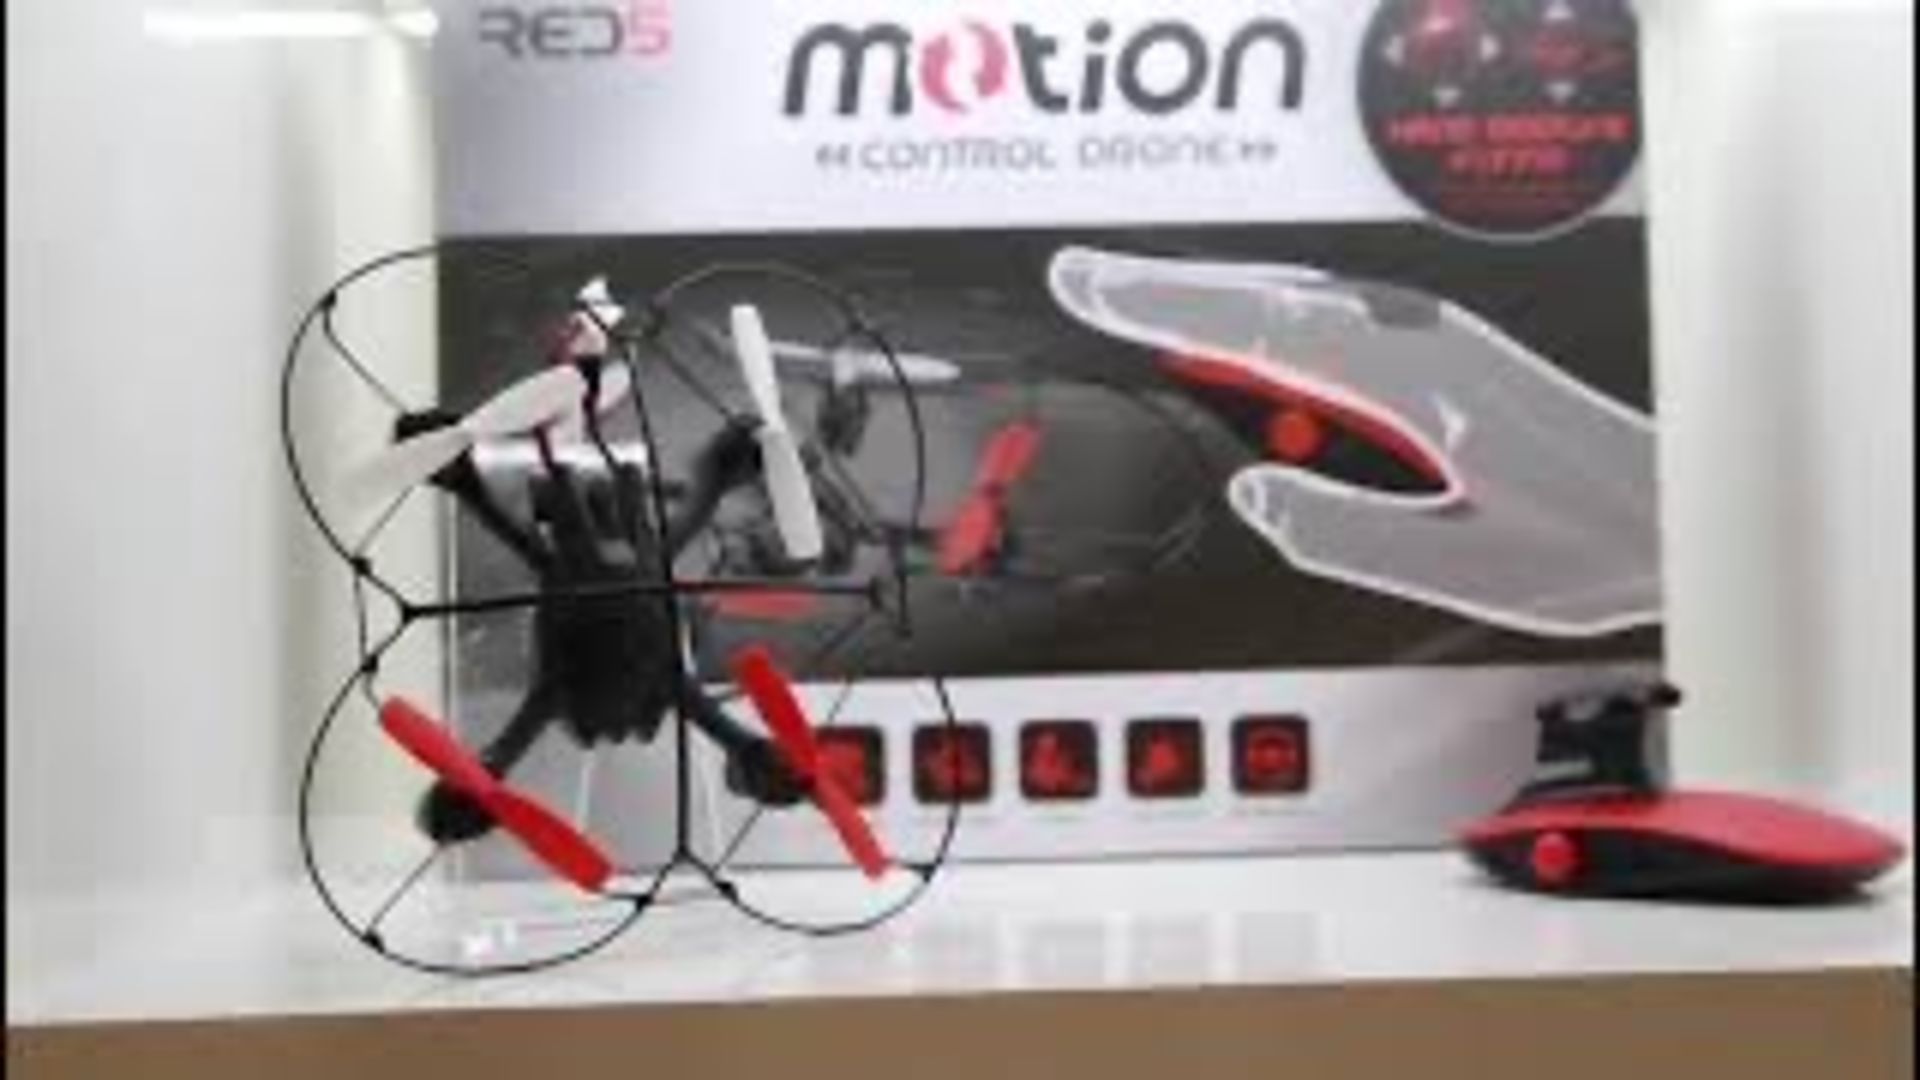 X 3 Red5 Motion Control Drone Red RRP £30 Each